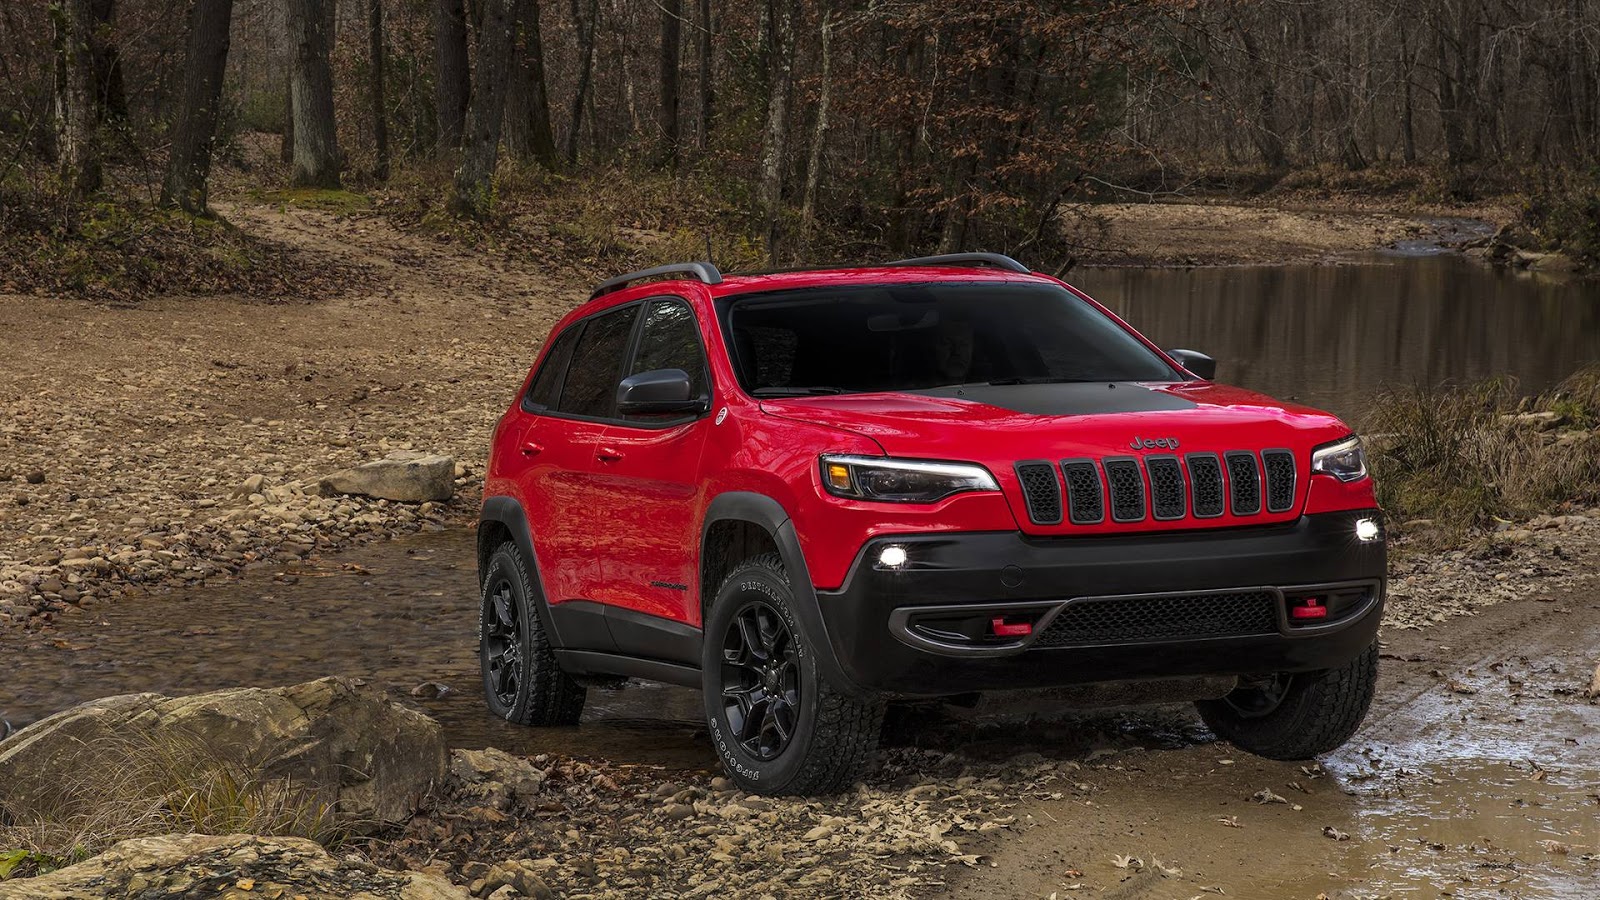 2019 Jeep Cherokee Premieres In Detroit With New Looks And